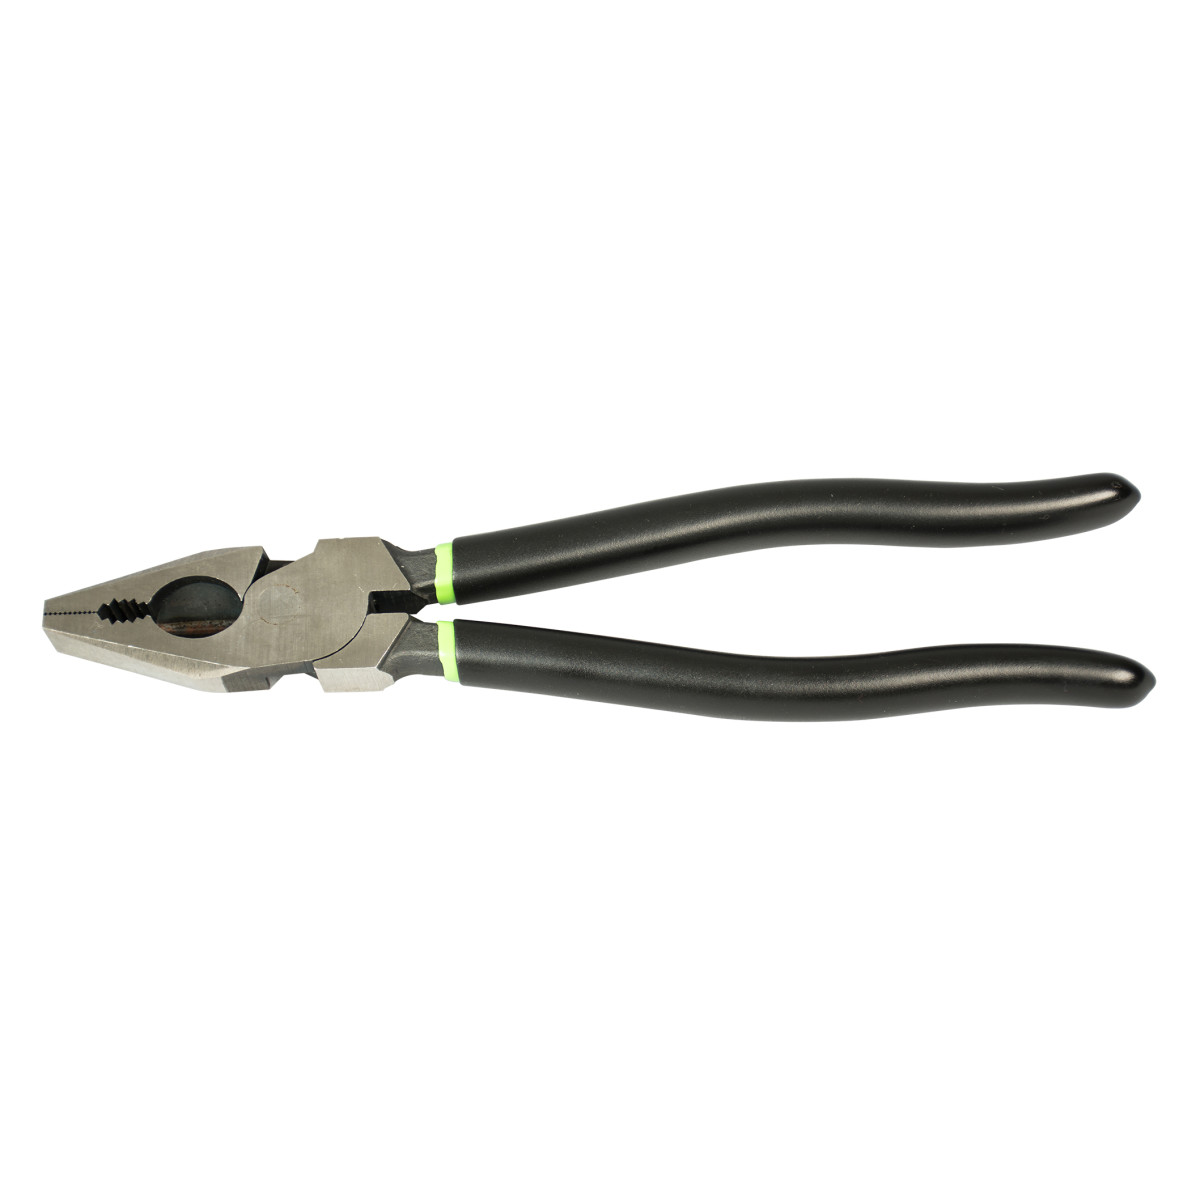 Toothed pipe grip for strong hold on rounded material.  High leverage design provides greater cutting power than standard plier designs.  Versatile jaw design for use on flat or rounded material.  Double-dipped vinyl handle grips provide comfort and slip resistance